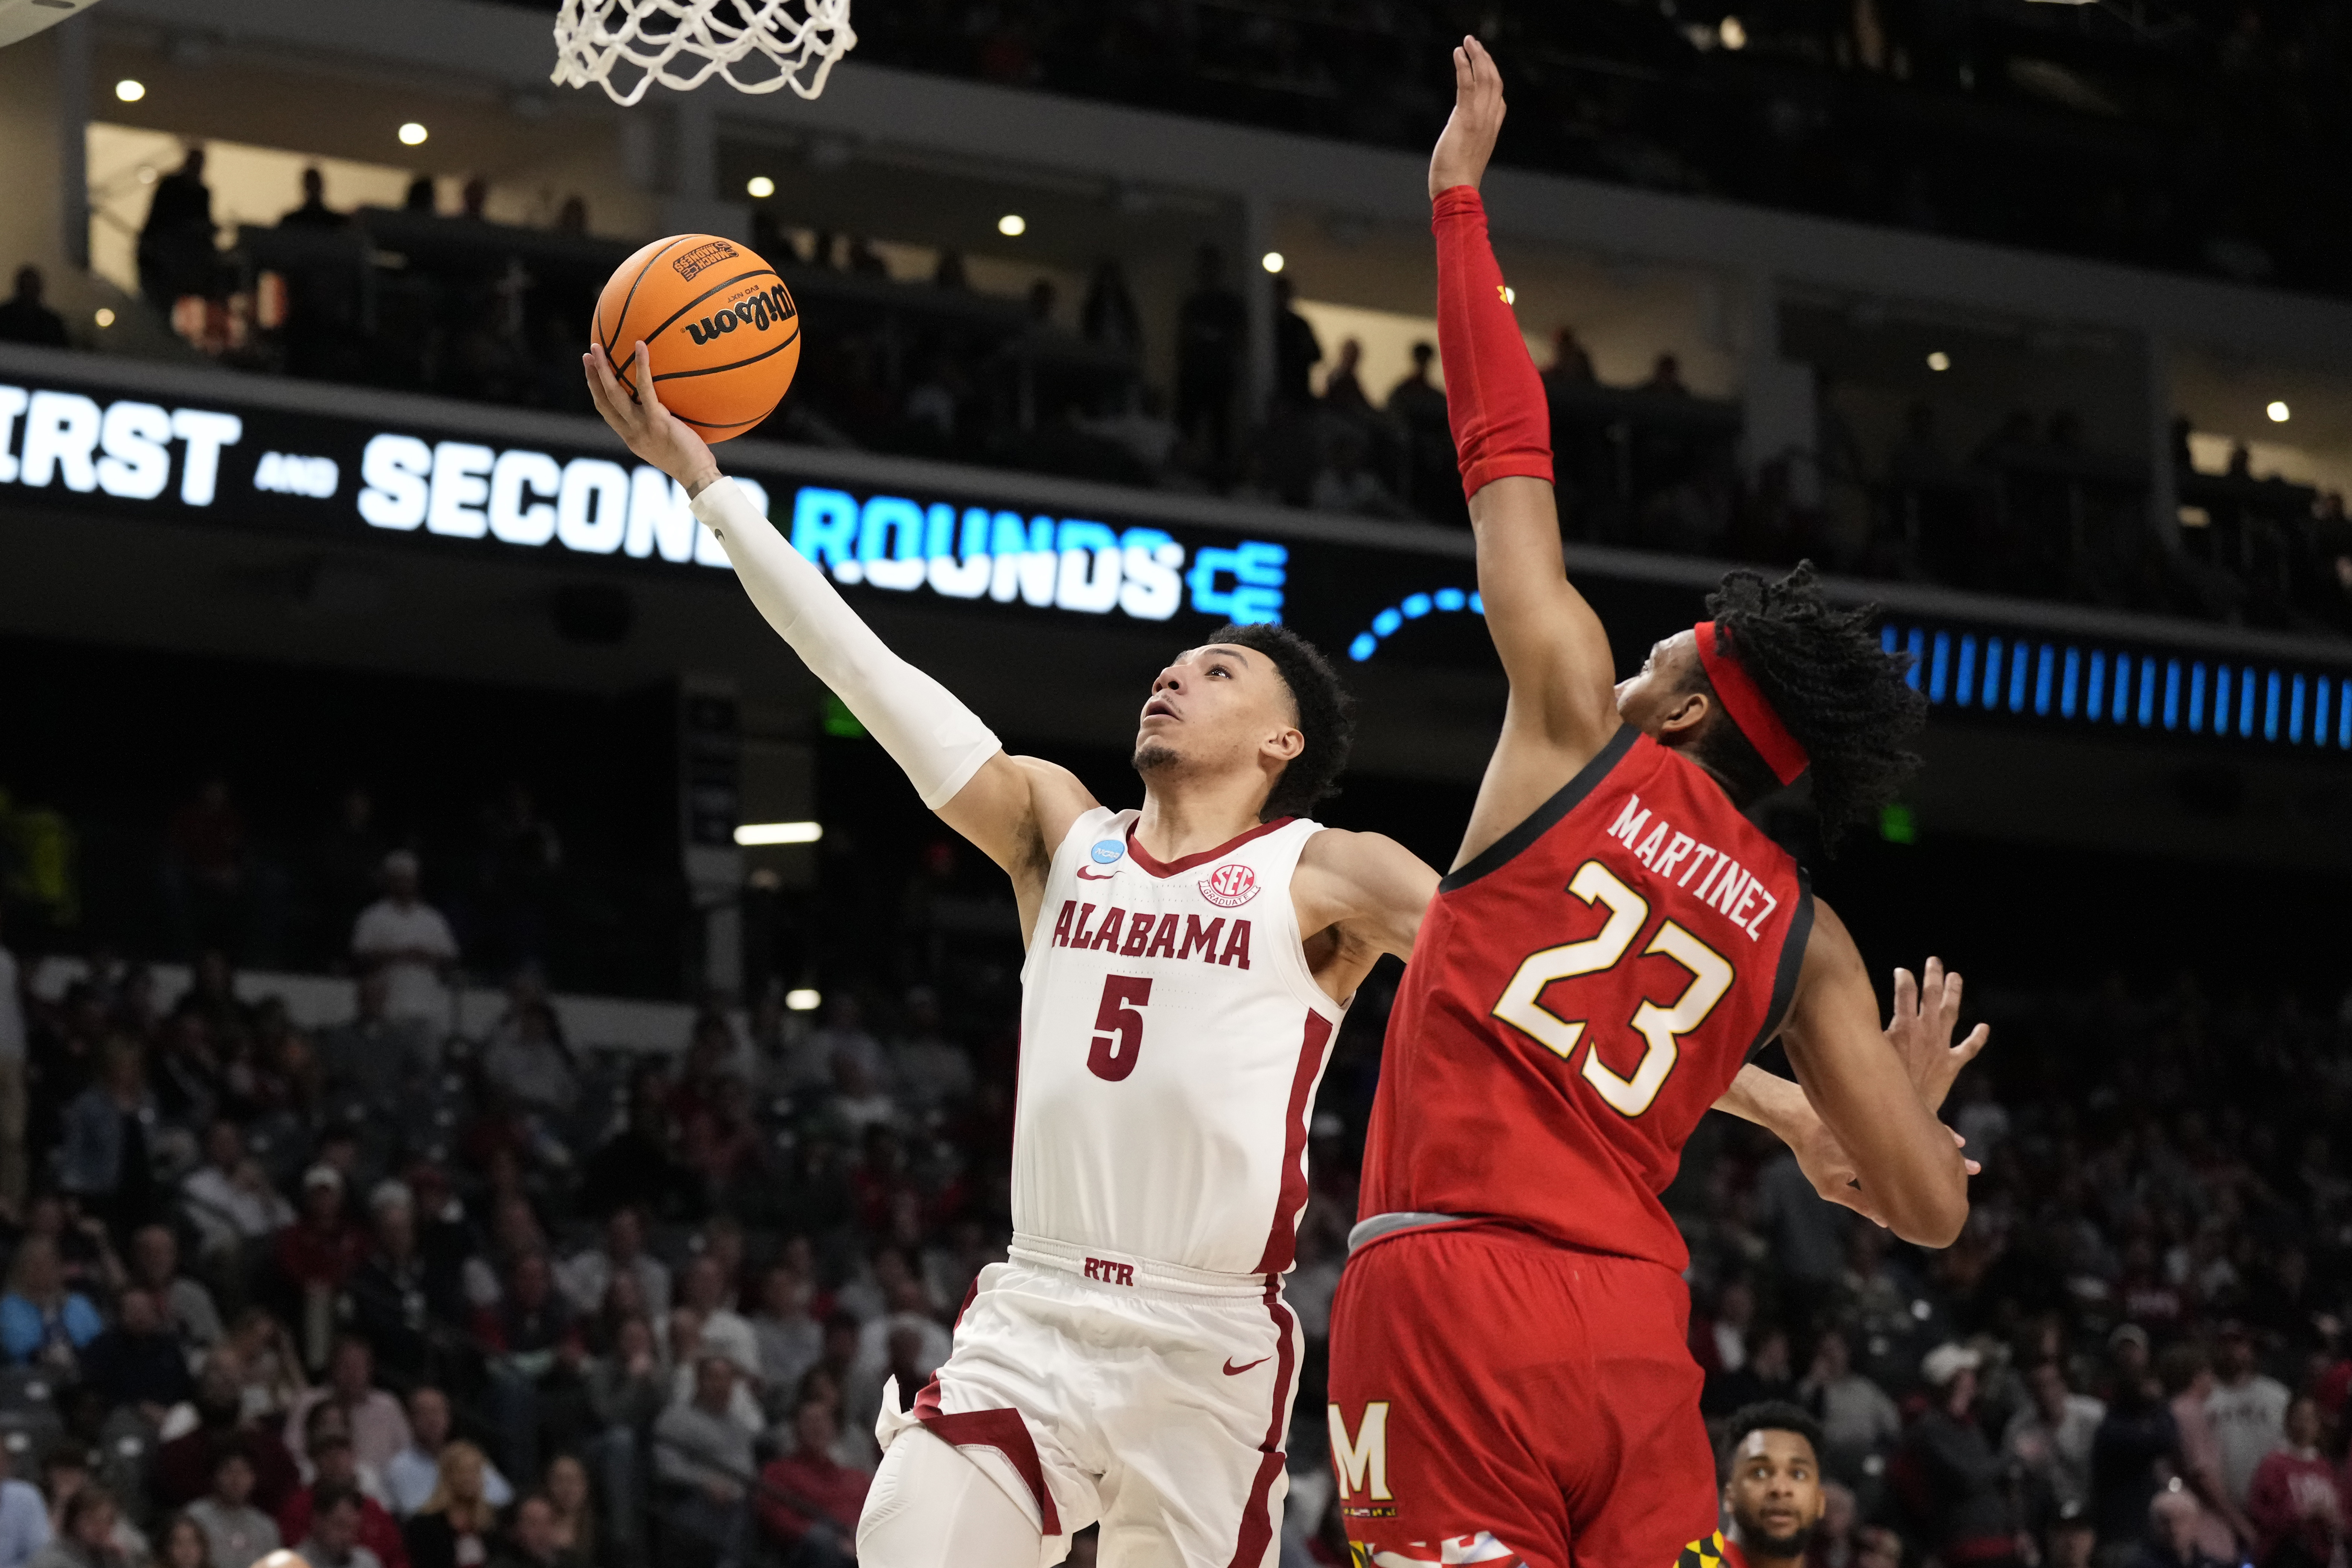 Alabama PG Quinerly announces plans to transfer from turmoil-filled program - WholeHogSports